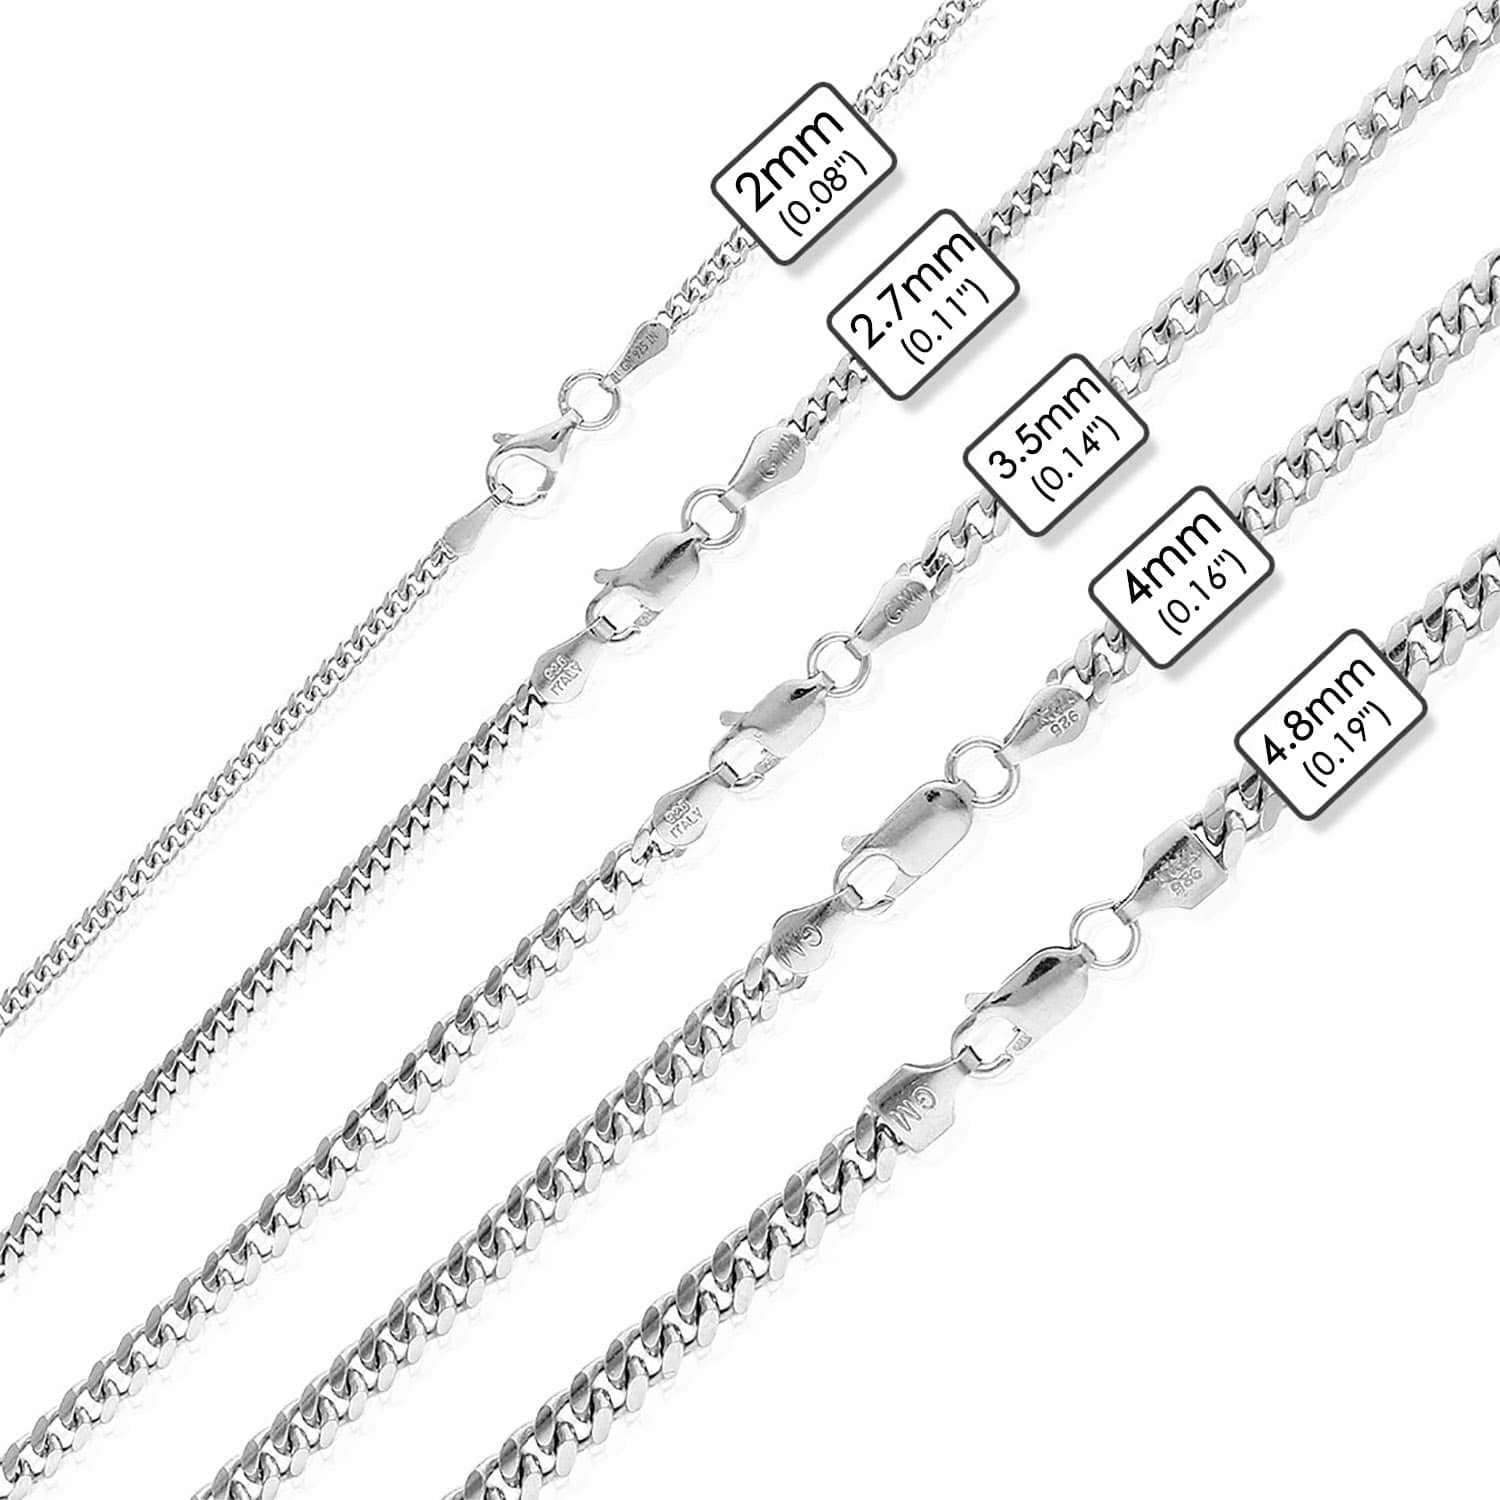 2mm Cuban Chain Necklace, Sterling Silver, Men's Necklaces